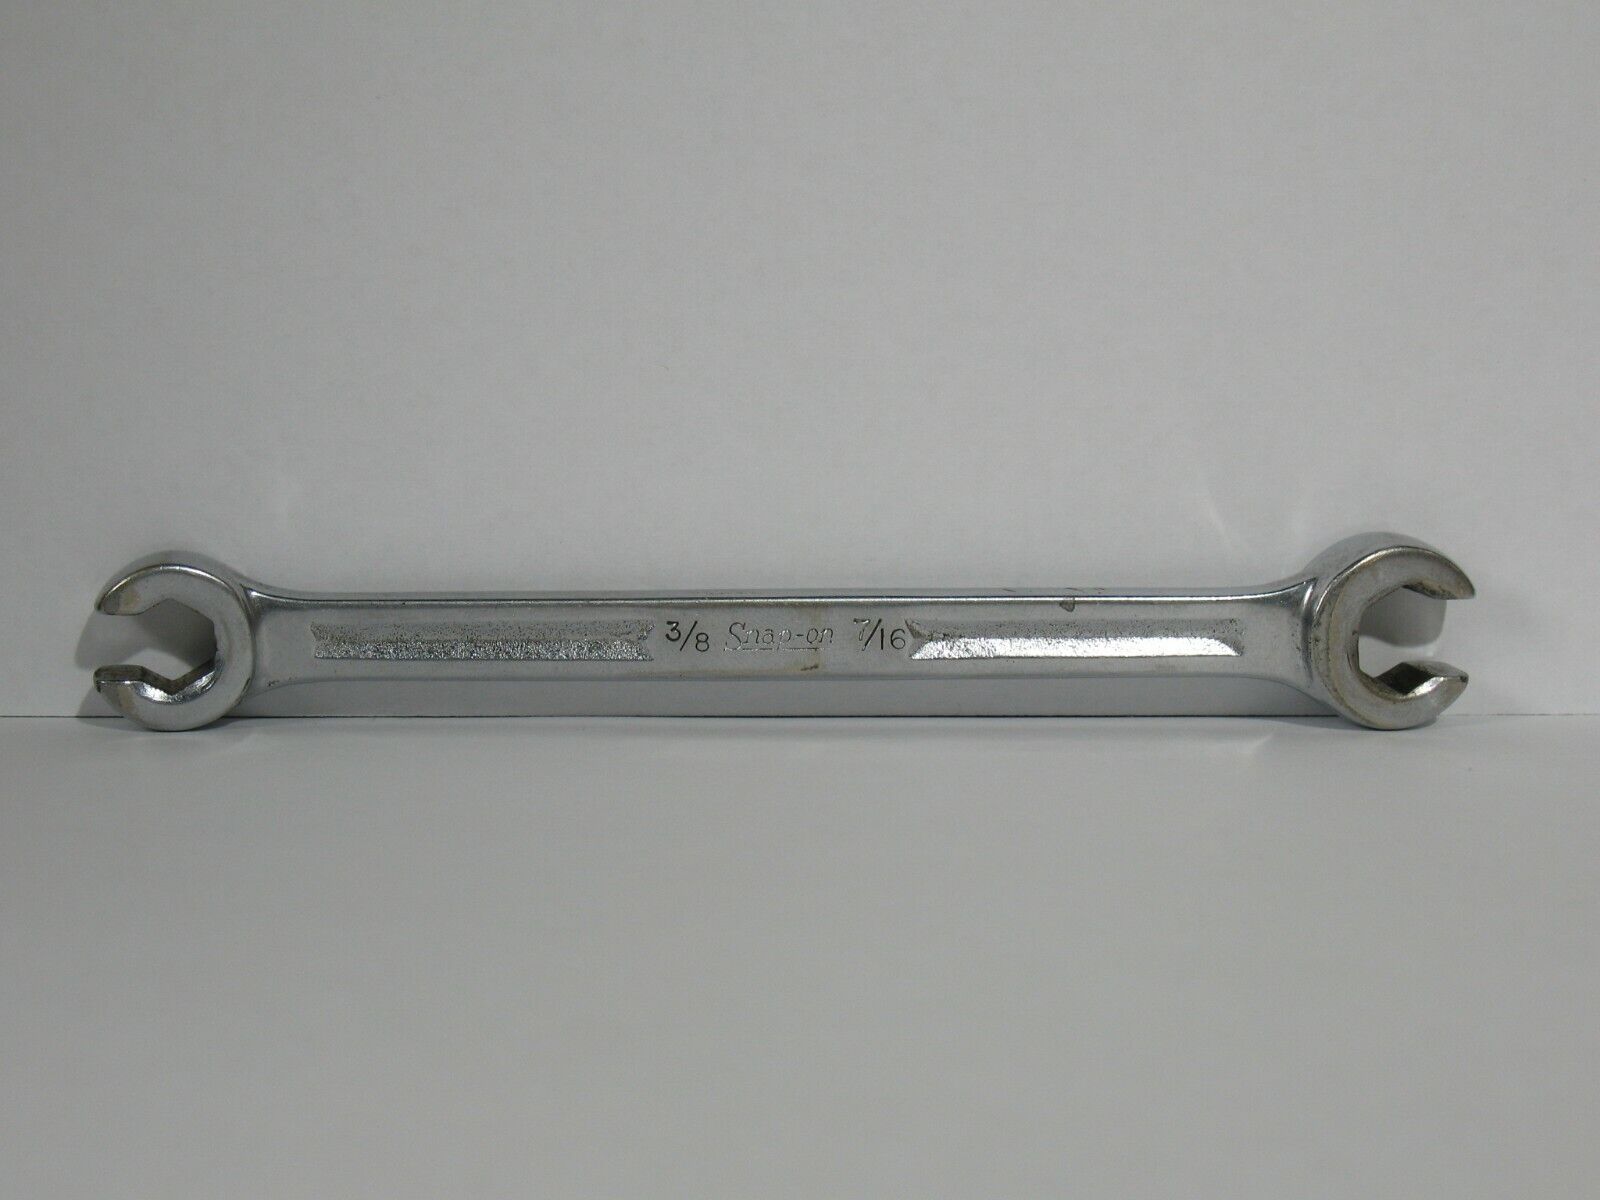 Snap On Tools Rxv-1214-s 3/8" X 7/16" Double Open End Flare Nut Wrench Vintage